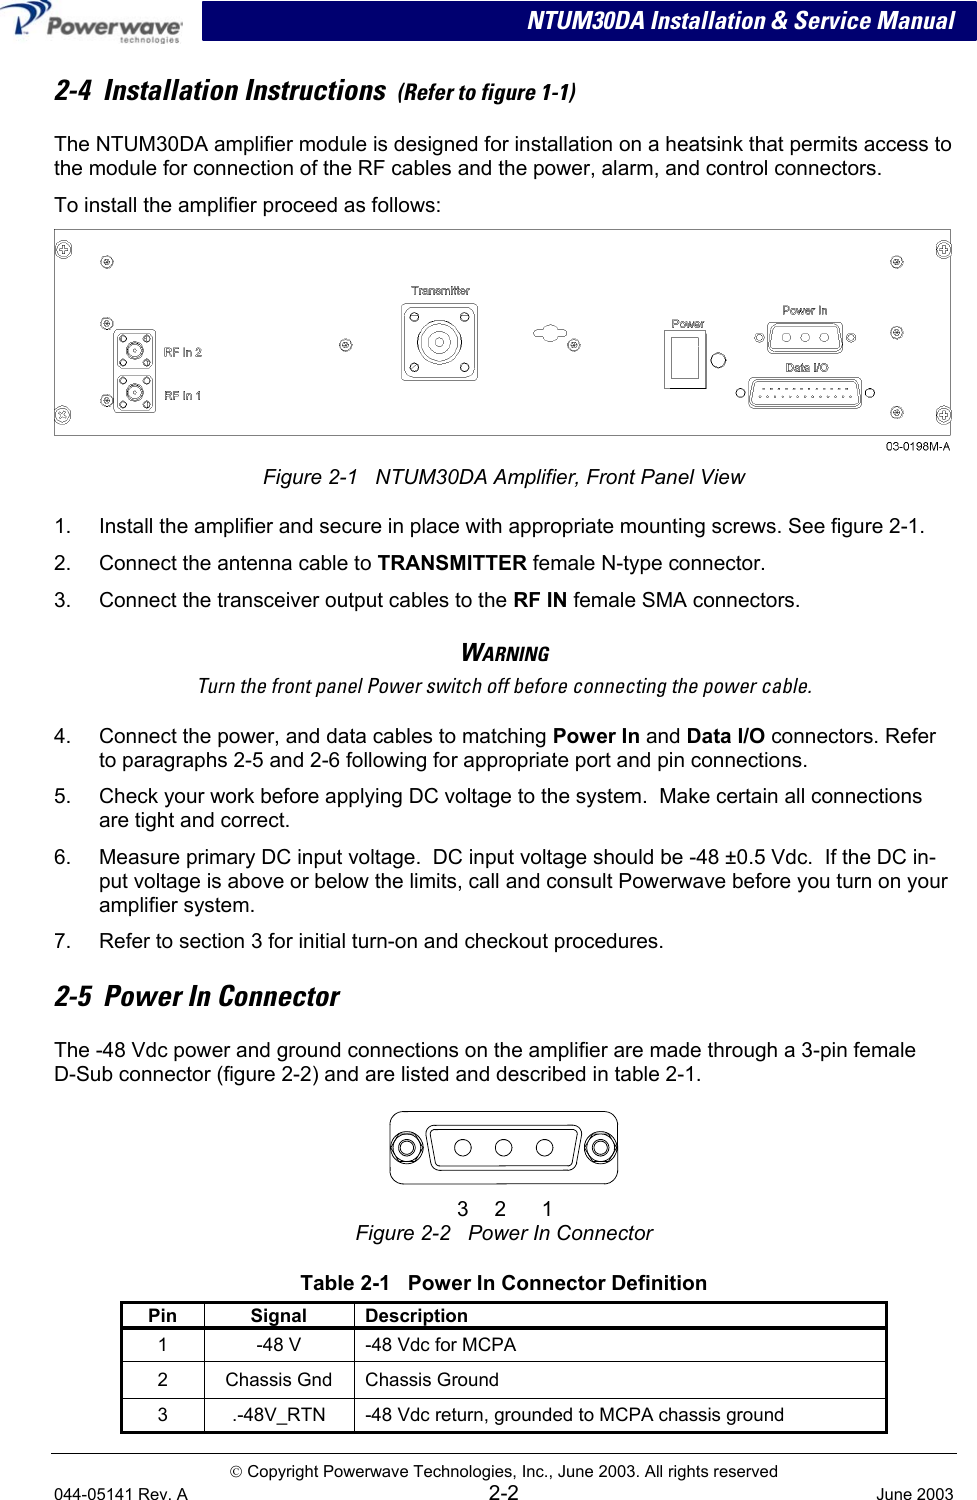  NTUM30DA Installation &amp; Service Manual 2-4  Installation Instructions  (Refer to figure 1-1) The NTUM30DA amplifier module is designed for installation on a heatsink that permits access to the module for connection of the RF cables and the power, alarm, and control connectors. To install the amplifier proceed as follows:  Figure 2-1   NTUM30DA Amplifier, Front Panel View 1.  Install the amplifier and secure in place with appropriate mounting screws. See figure 2-1. 2.  Connect the antenna cable to TRANSMITTER female N-type connector. 3.  Connect the transceiver output cables to the RF IN female SMA connectors. WARNING Turn the front panel Power switch off before connecting the power cable. 4.  Connect the power, and data cables to matching Power In and Data I/O connectors. Refer to paragraphs 2-5 and 2-6 following for appropriate port and pin connections. 5.  Check your work before applying DC voltage to the system.  Make certain all connections are tight and correct. 6.  Measure primary DC input voltage.  DC input voltage should be -48 ±0.5 Vdc.  If the DC in-put voltage is above or below the limits, call and consult Powerwave before you turn on your amplifier system. 7.  Refer to section 3 for initial turn-on and checkout procedures. 2-5  Power In Connector  The -48 Vdc power and ground connections on the amplifier are made through a 3-pin female  D-Sub connector (figure 2-2) and are listed and described in table 2-1.    3 2 1 Figure 2-2   Power In Connector  Table 2-1   Power In Connector Definition Pin Signal Description 1  -48 V  -48 Vdc for MCPA 2  Chassis Gnd  Chassis Ground  3  .-48V_RTN  -48 Vdc return, grounded to MCPA chassis ground  Copyright Powerwave Technologies, Inc., June 2003. All rights reserved 044-05141 Rev. A 2-2  June 2003 